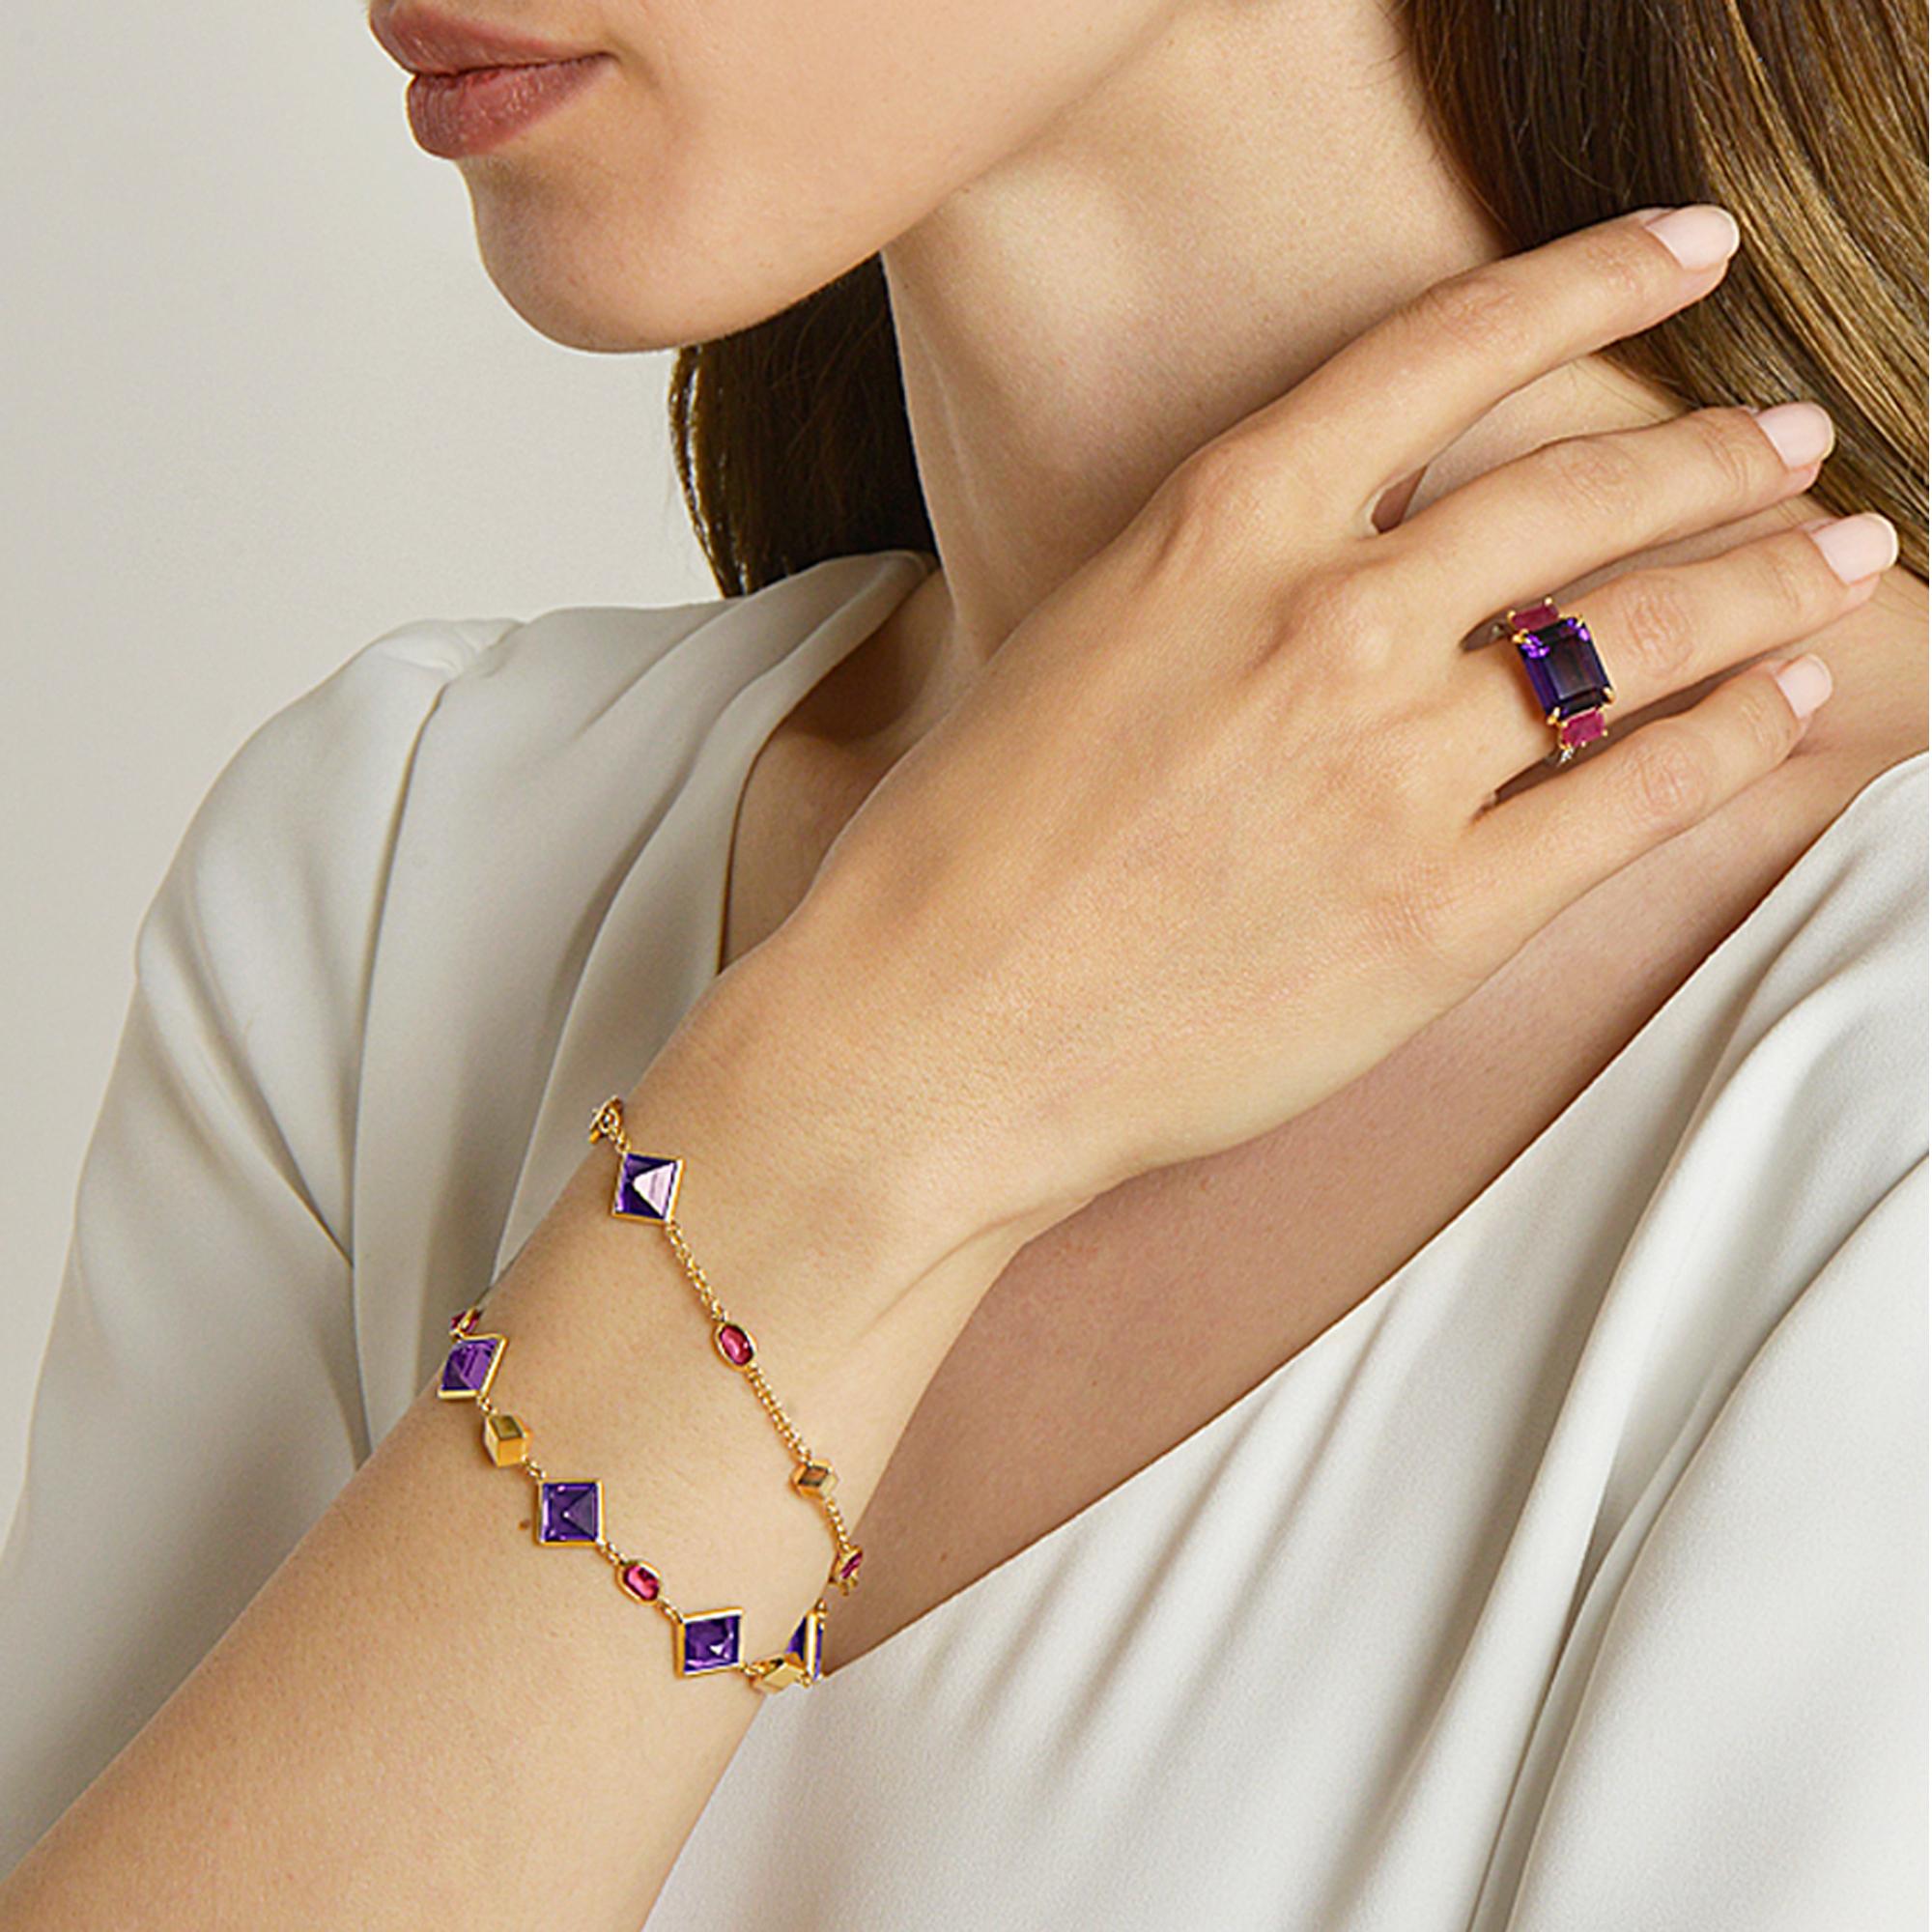 18kt yellow gold Florentine station bracelet with bezel set emerald-cut amethyst and oval rubies, and signature Brillante® detail.

Inspired by the Garden of the Iris, the Florentine collection pairs bold color combinations of geometric gemstones to